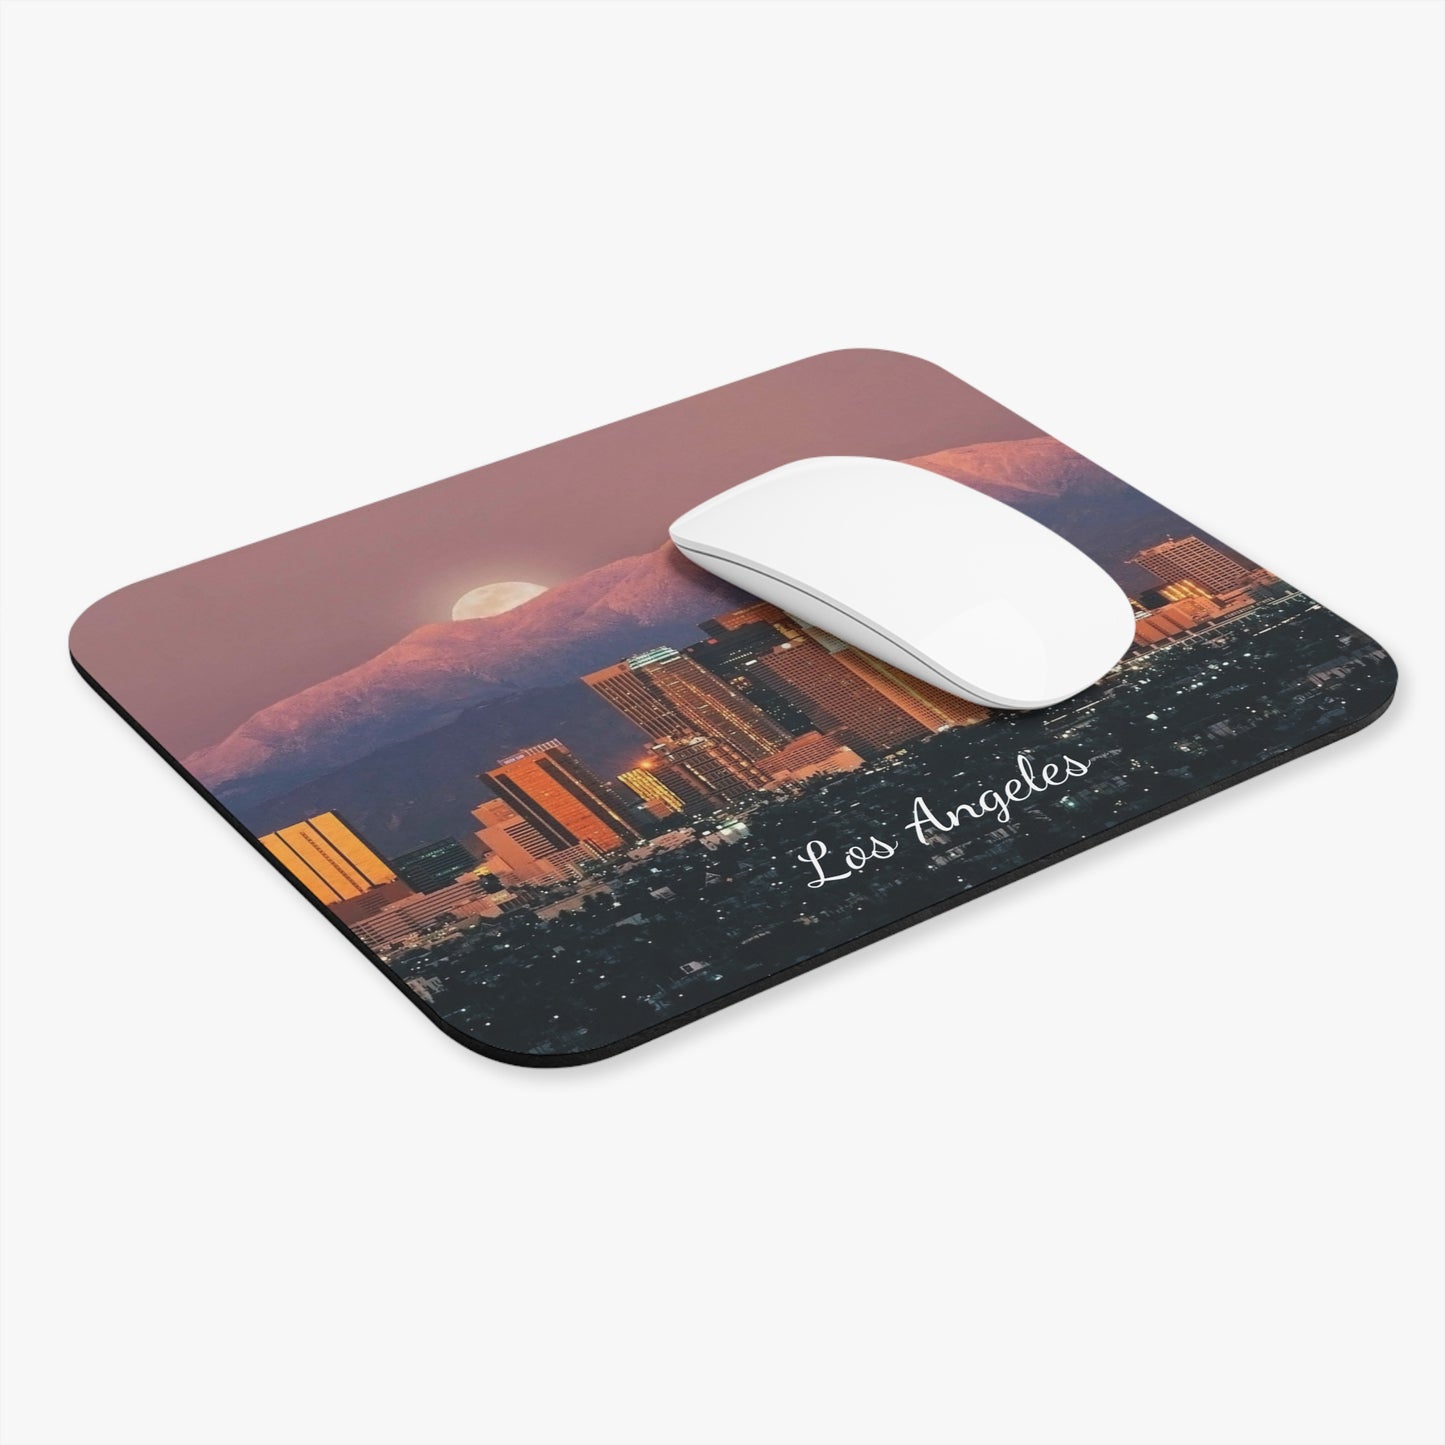 Los Angeles California - Mouse Pad (Rectangle) 9x8 inch